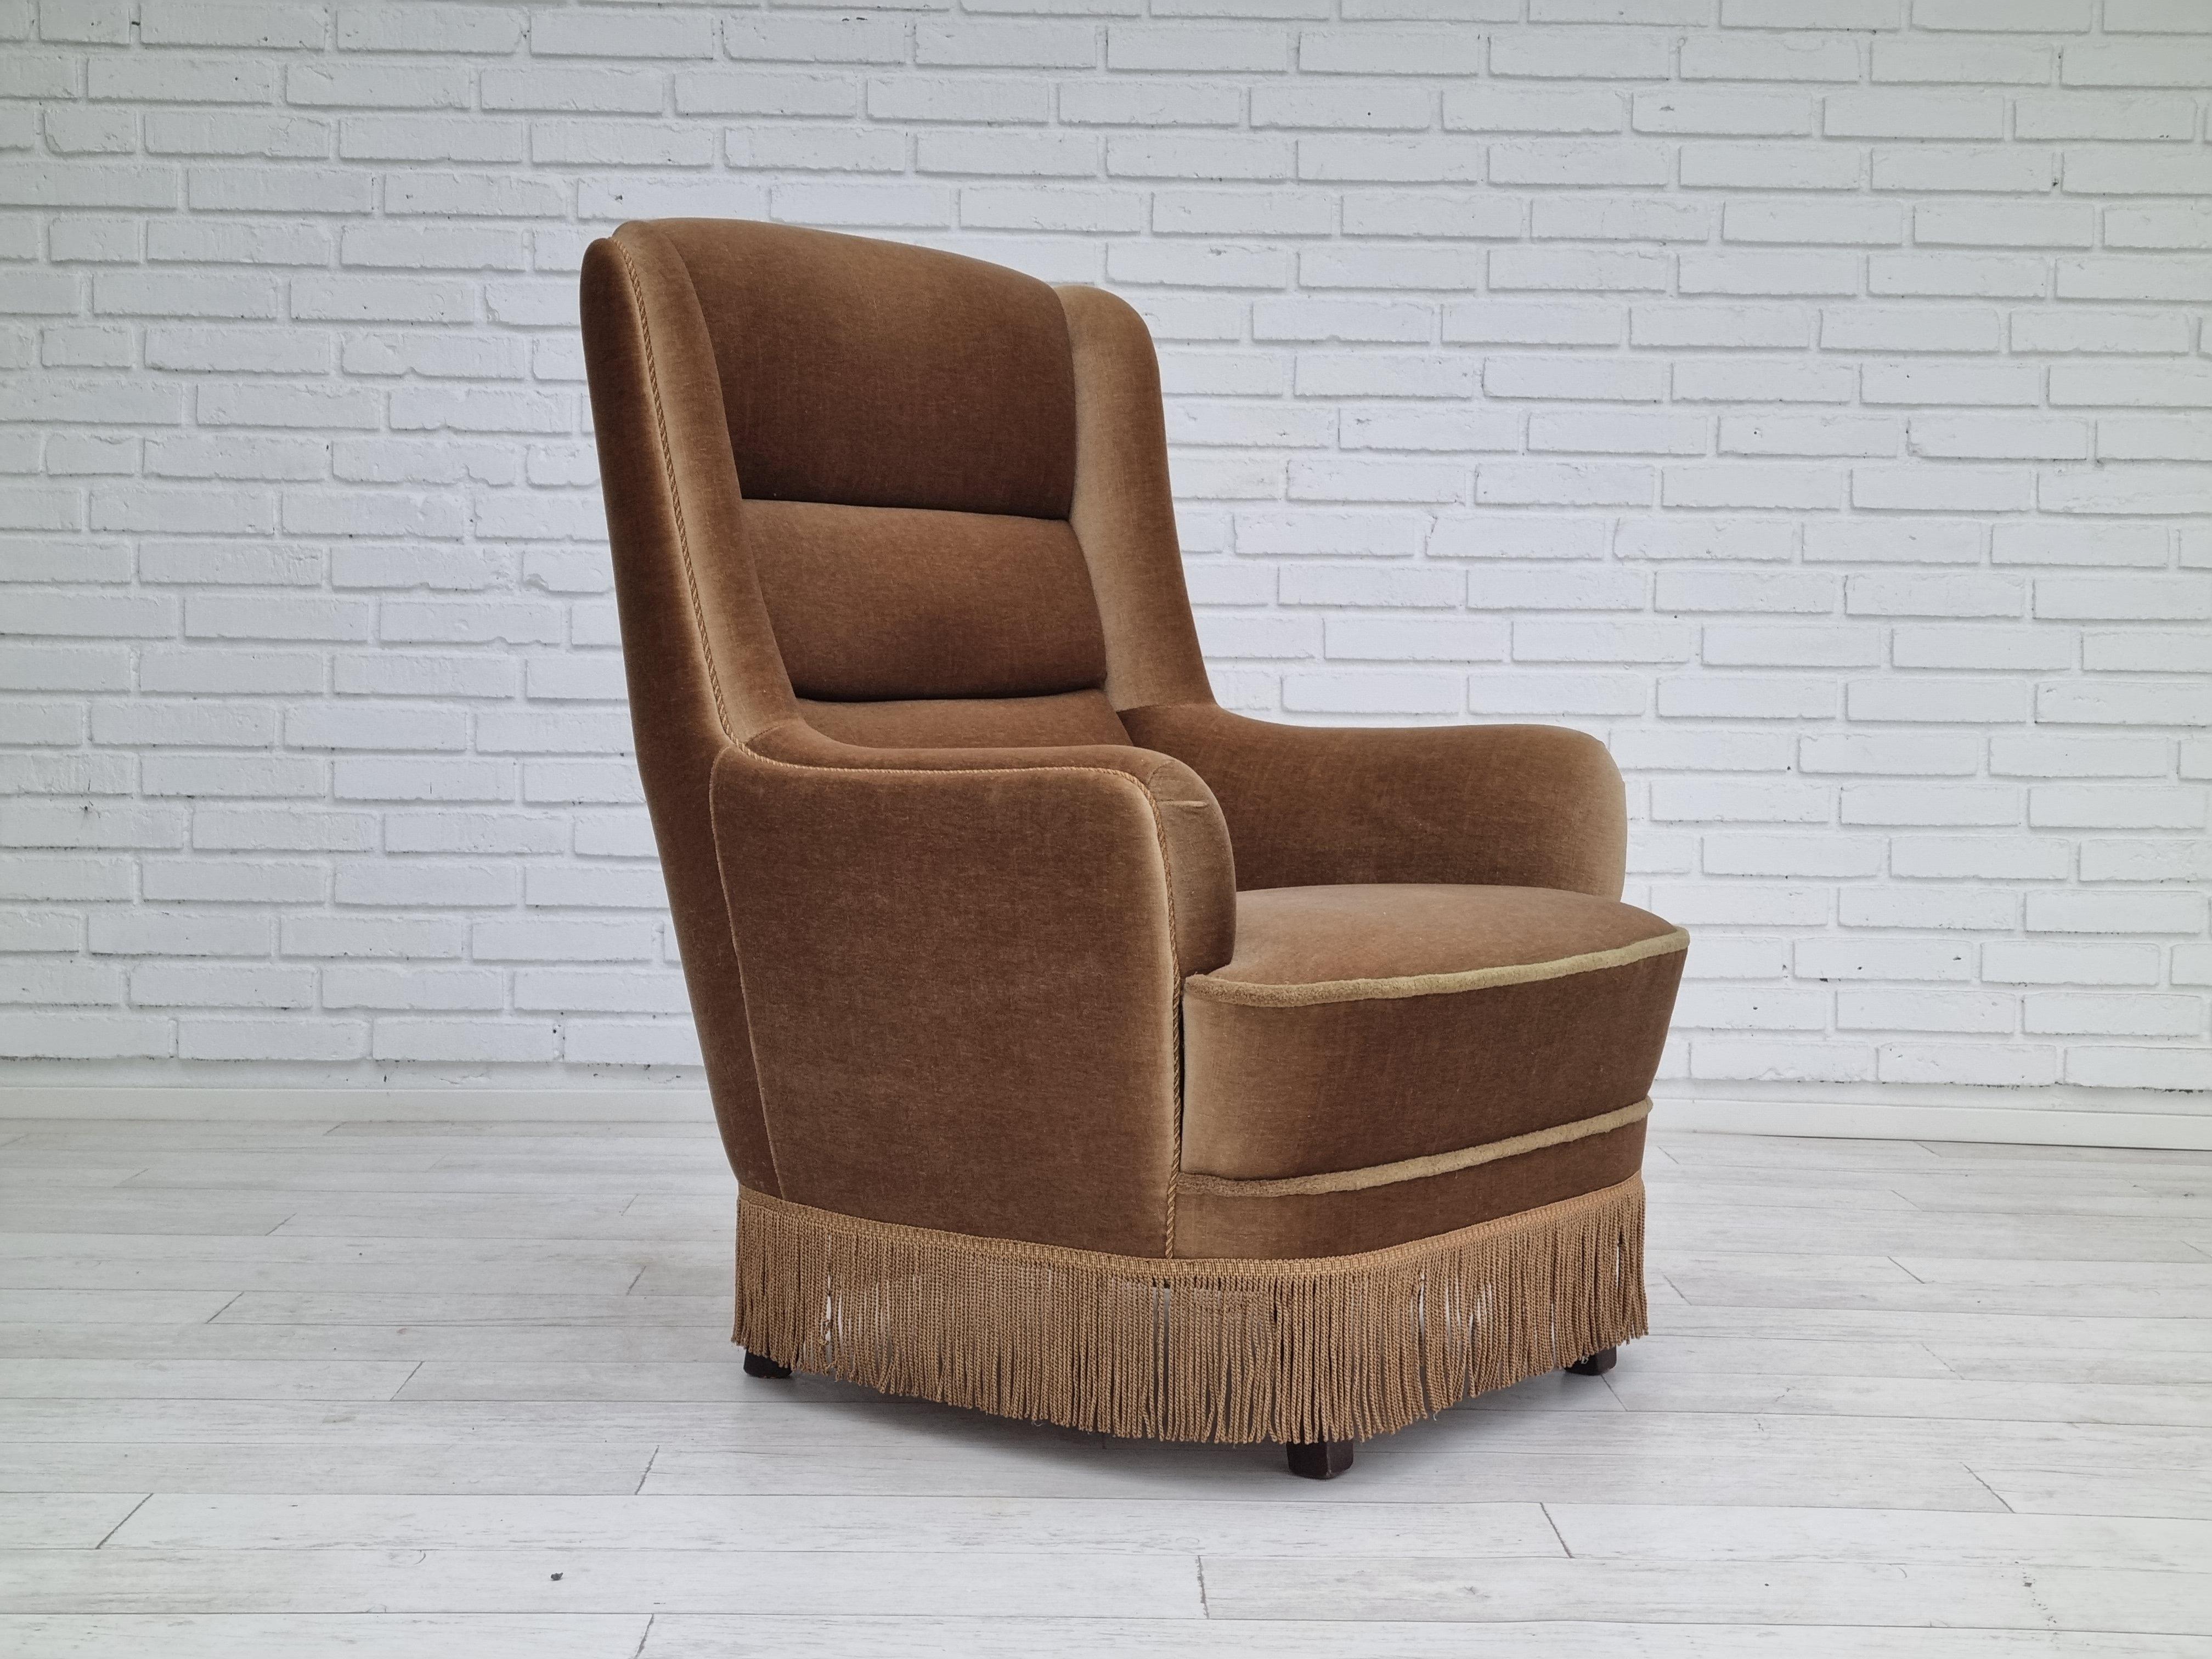 1960s, Danish High Back Armchair, Original Upholstery, Green Velour In Good Condition For Sale In Tarm, 82